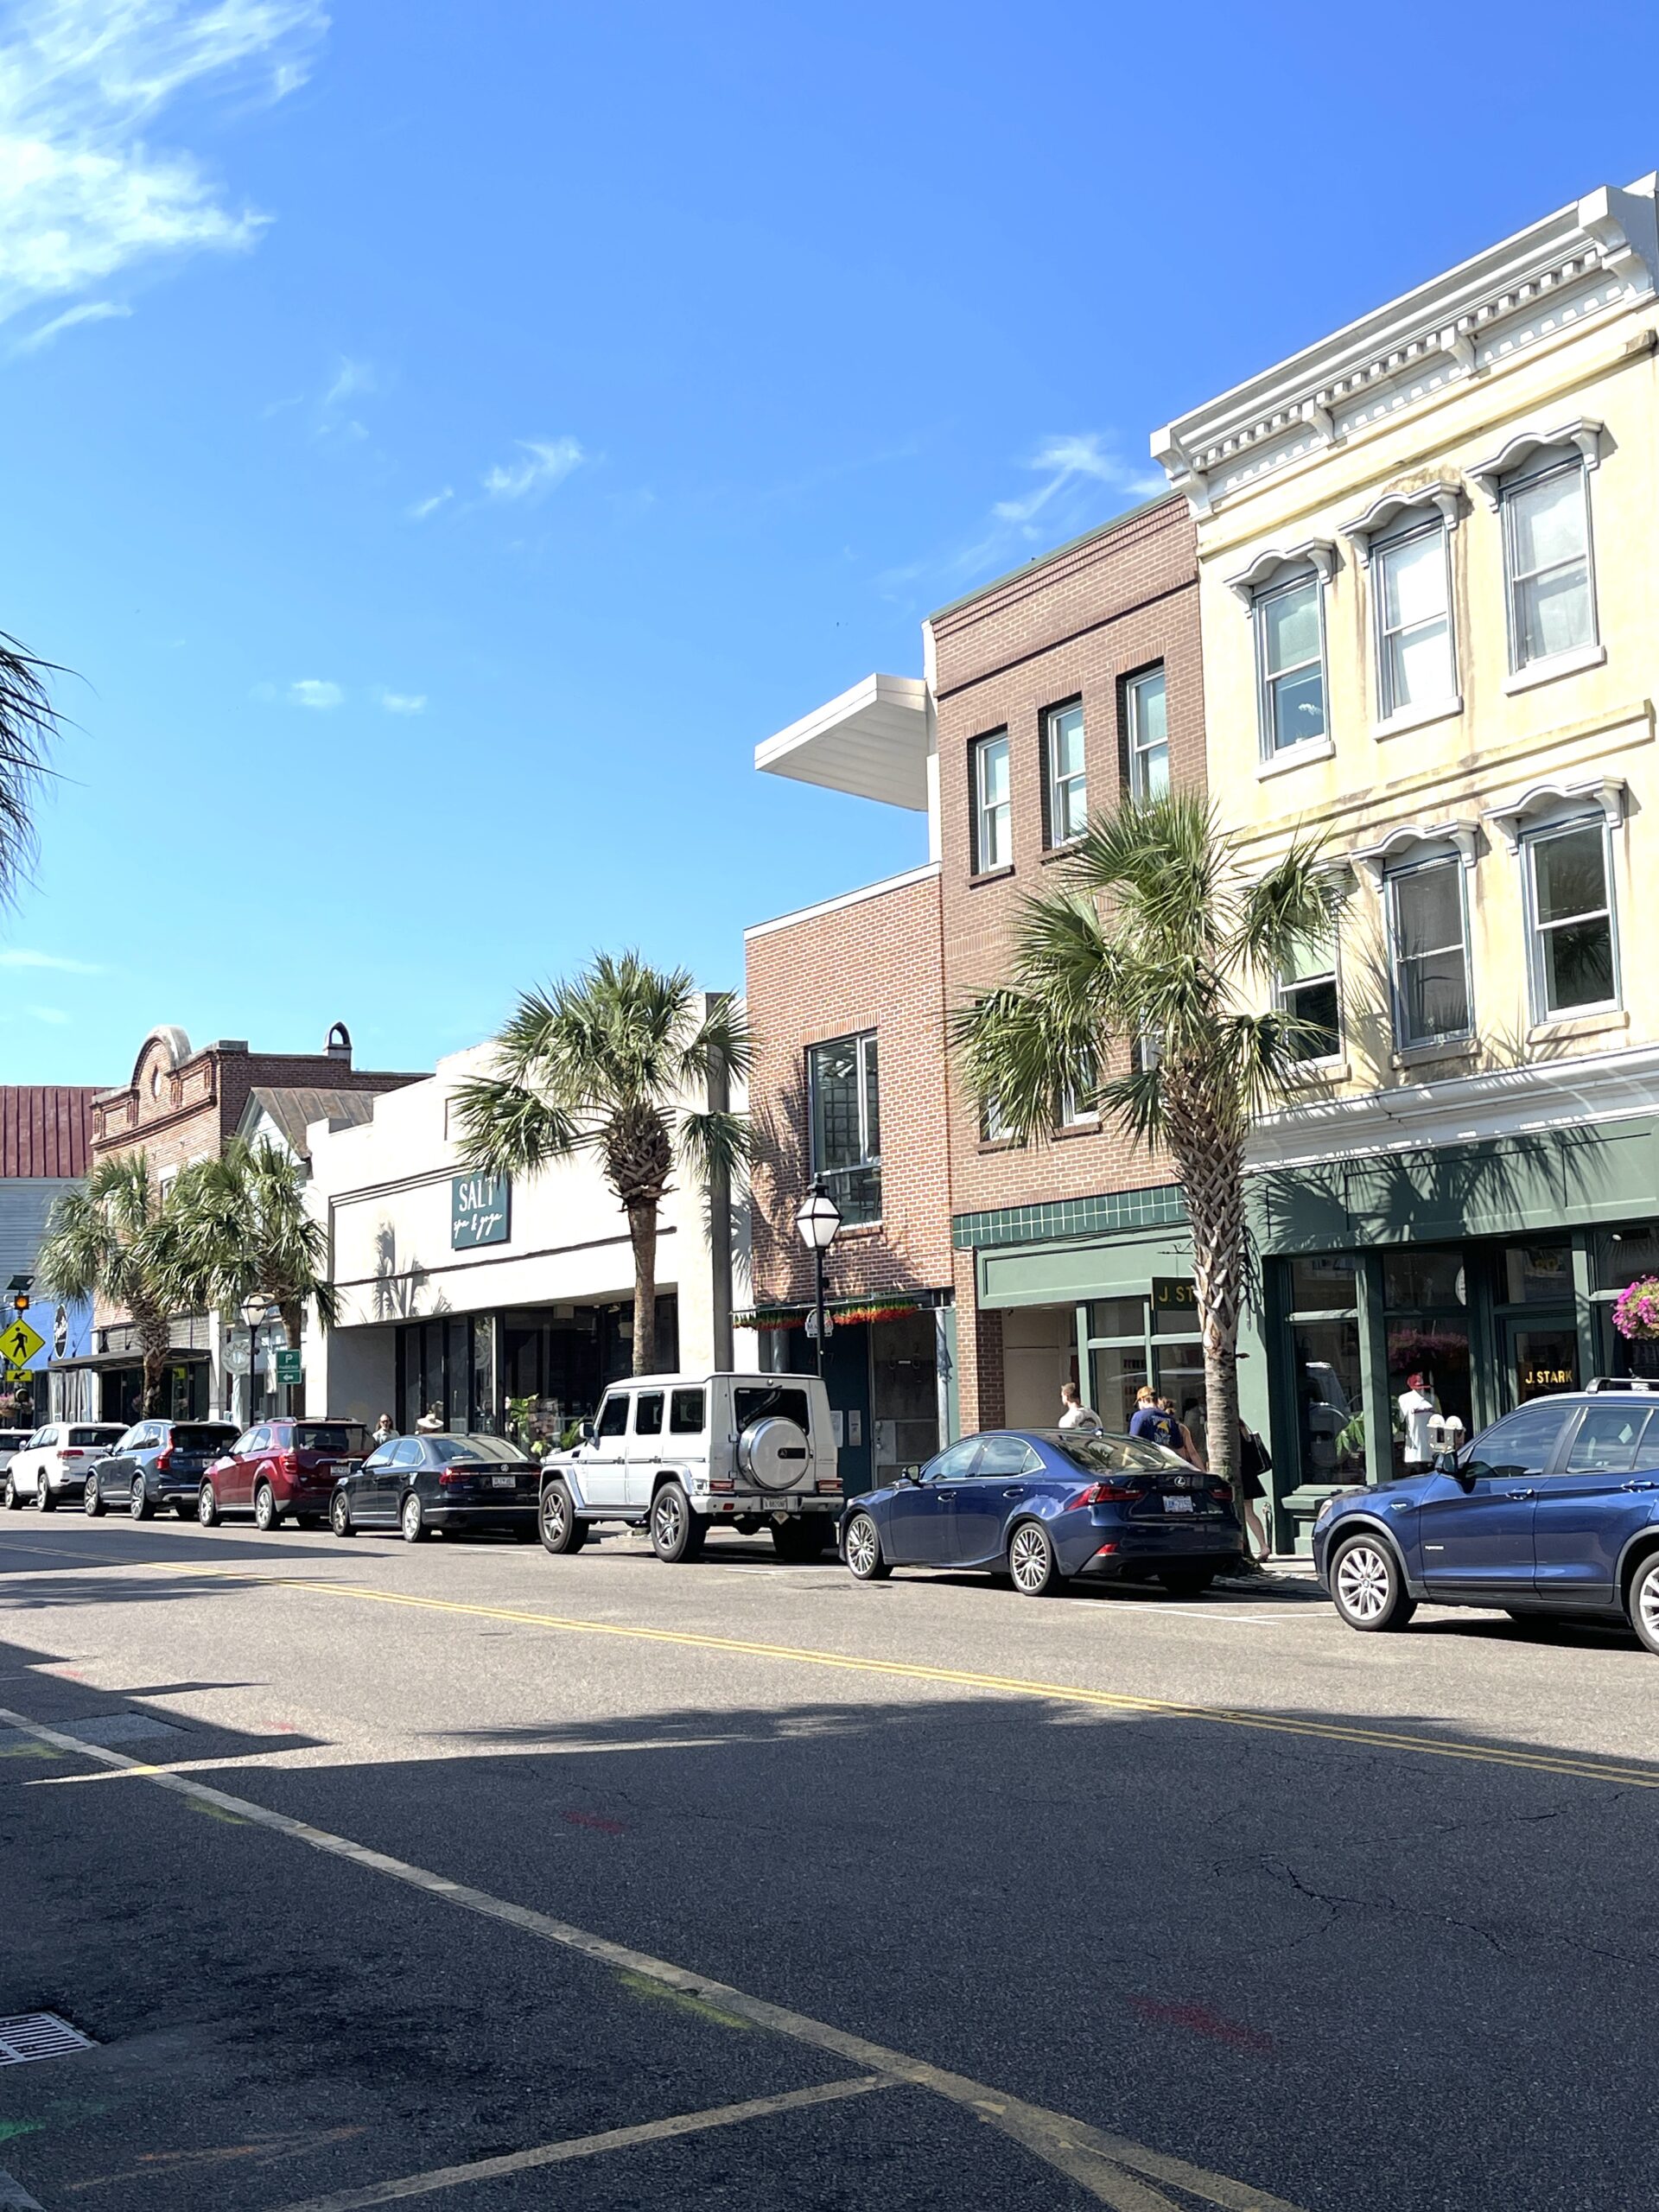 Image shows a main street in Charleston, SC. 